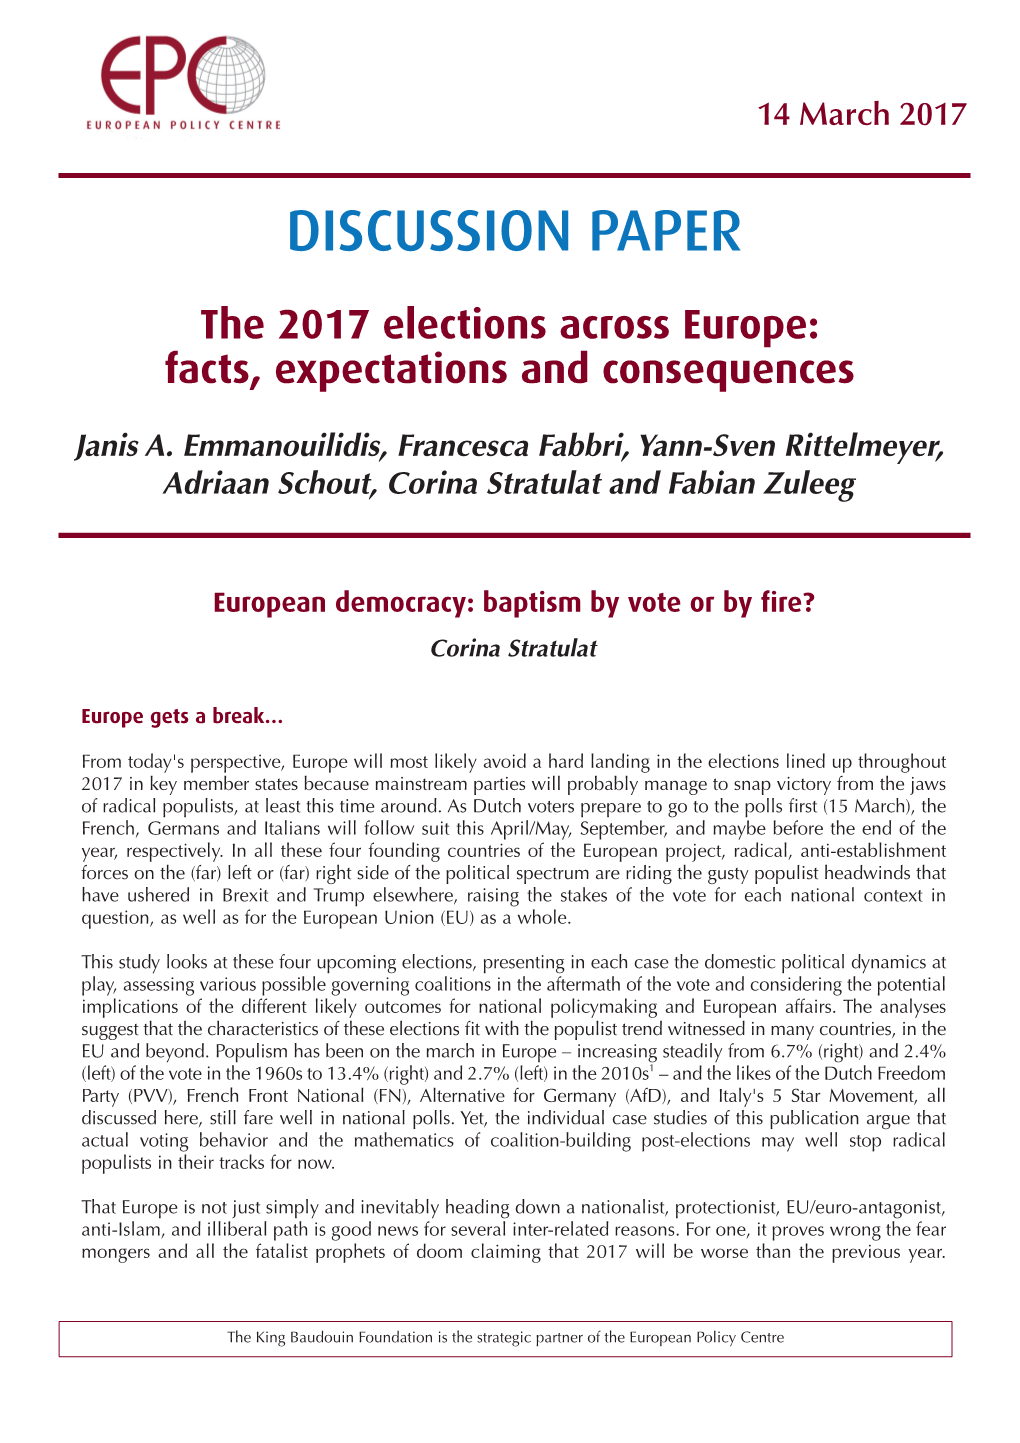 2017 Elections Across Europe: Facts, Expectations and Consequences